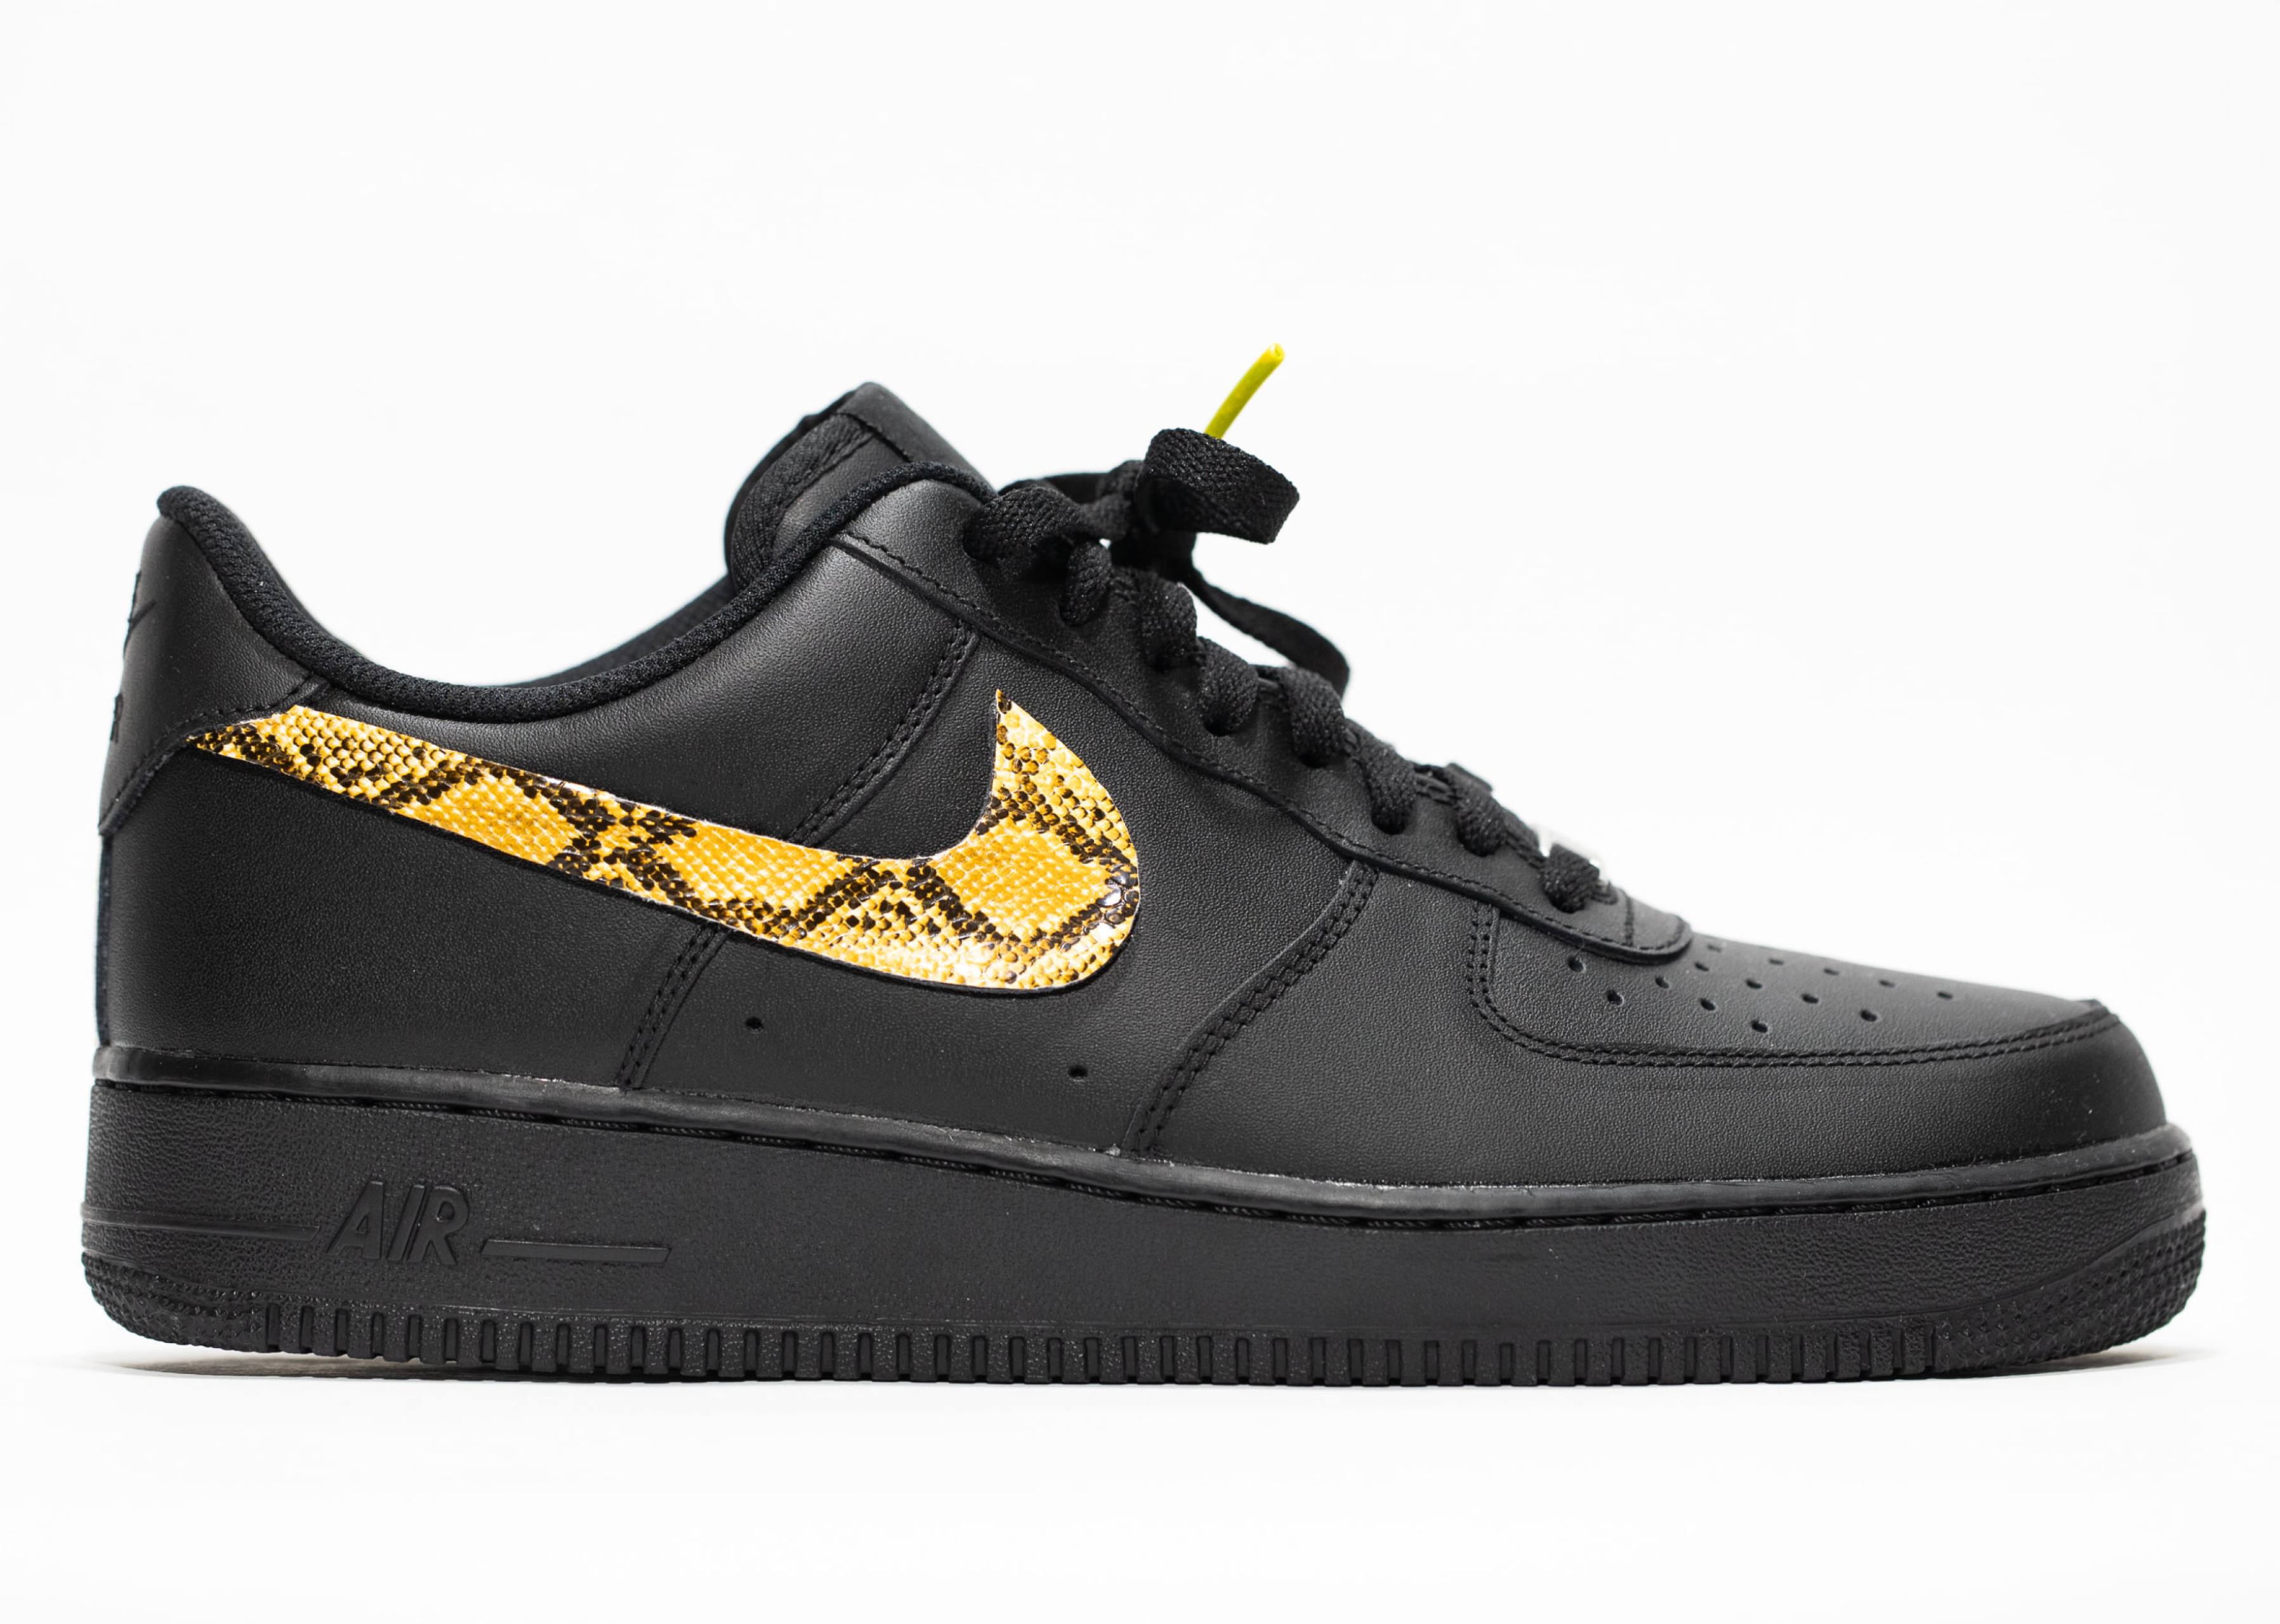 air force black and yellow